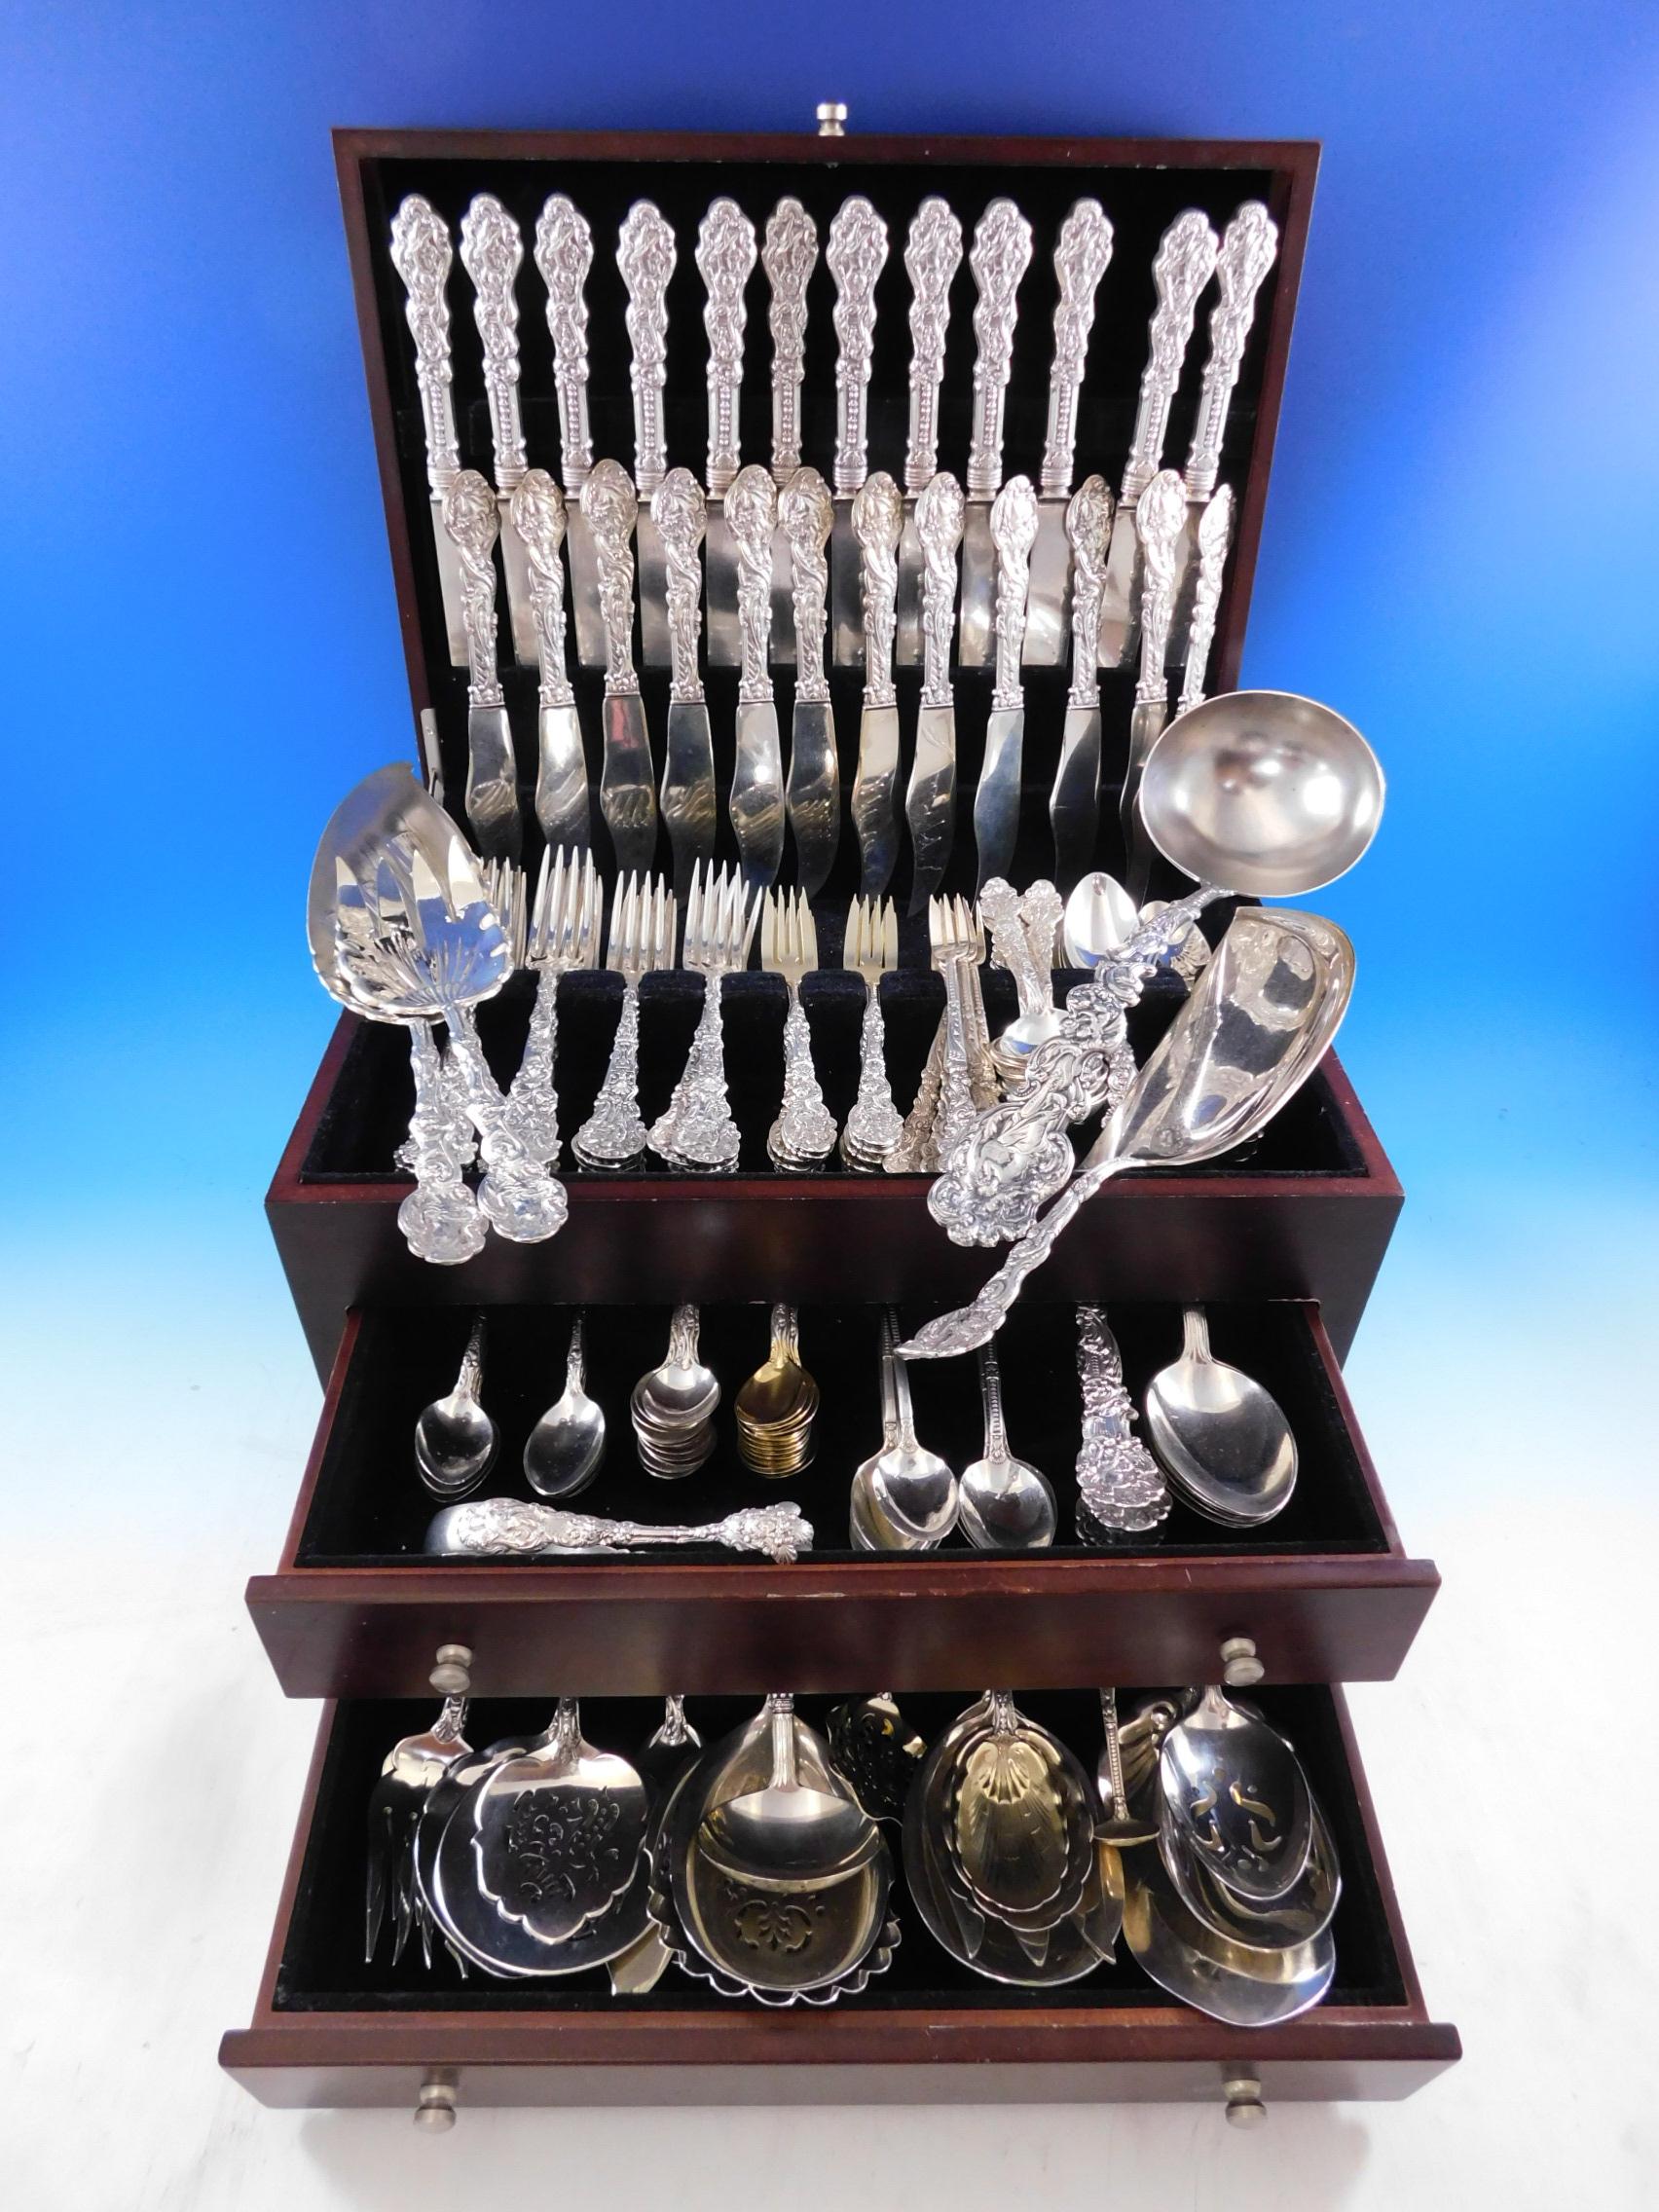 Monumental dinner size multi-motif Versailles by Gorham sterling silver flatware set - 179 pieces. This set includes: 

12 dinner size knives, 9 3/4